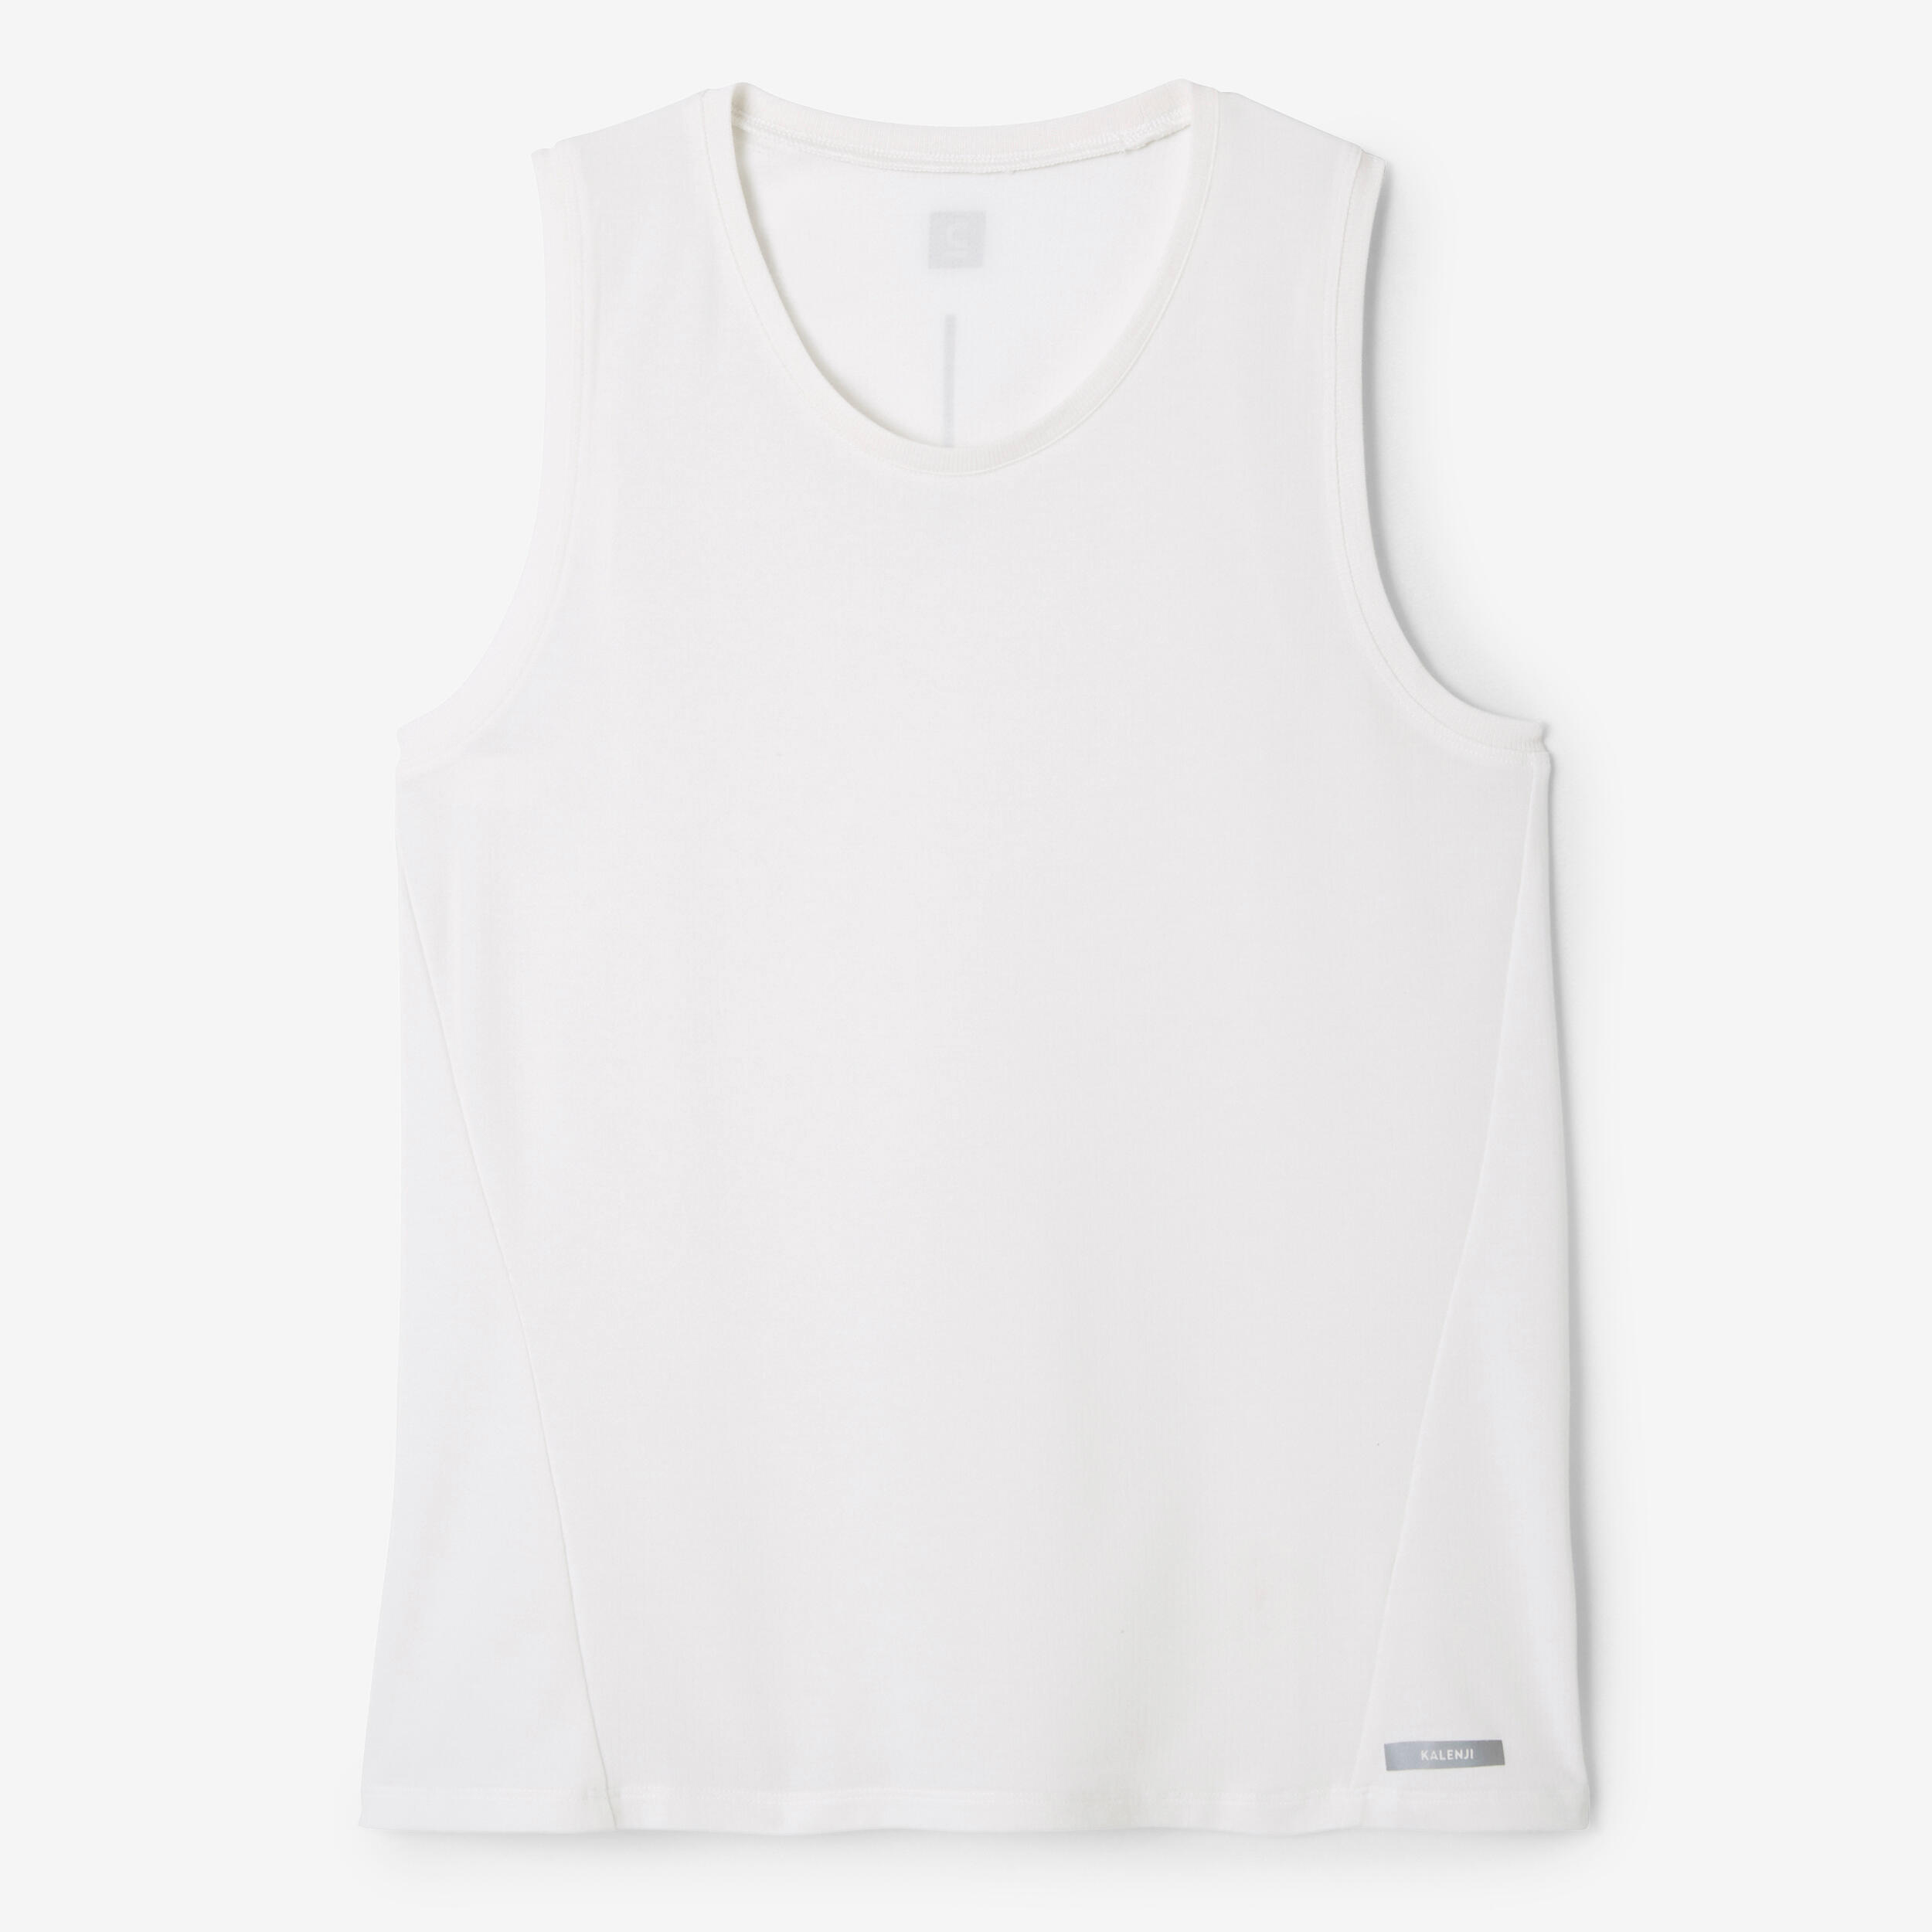 Women's breathable running tank top Soft - white 7/7